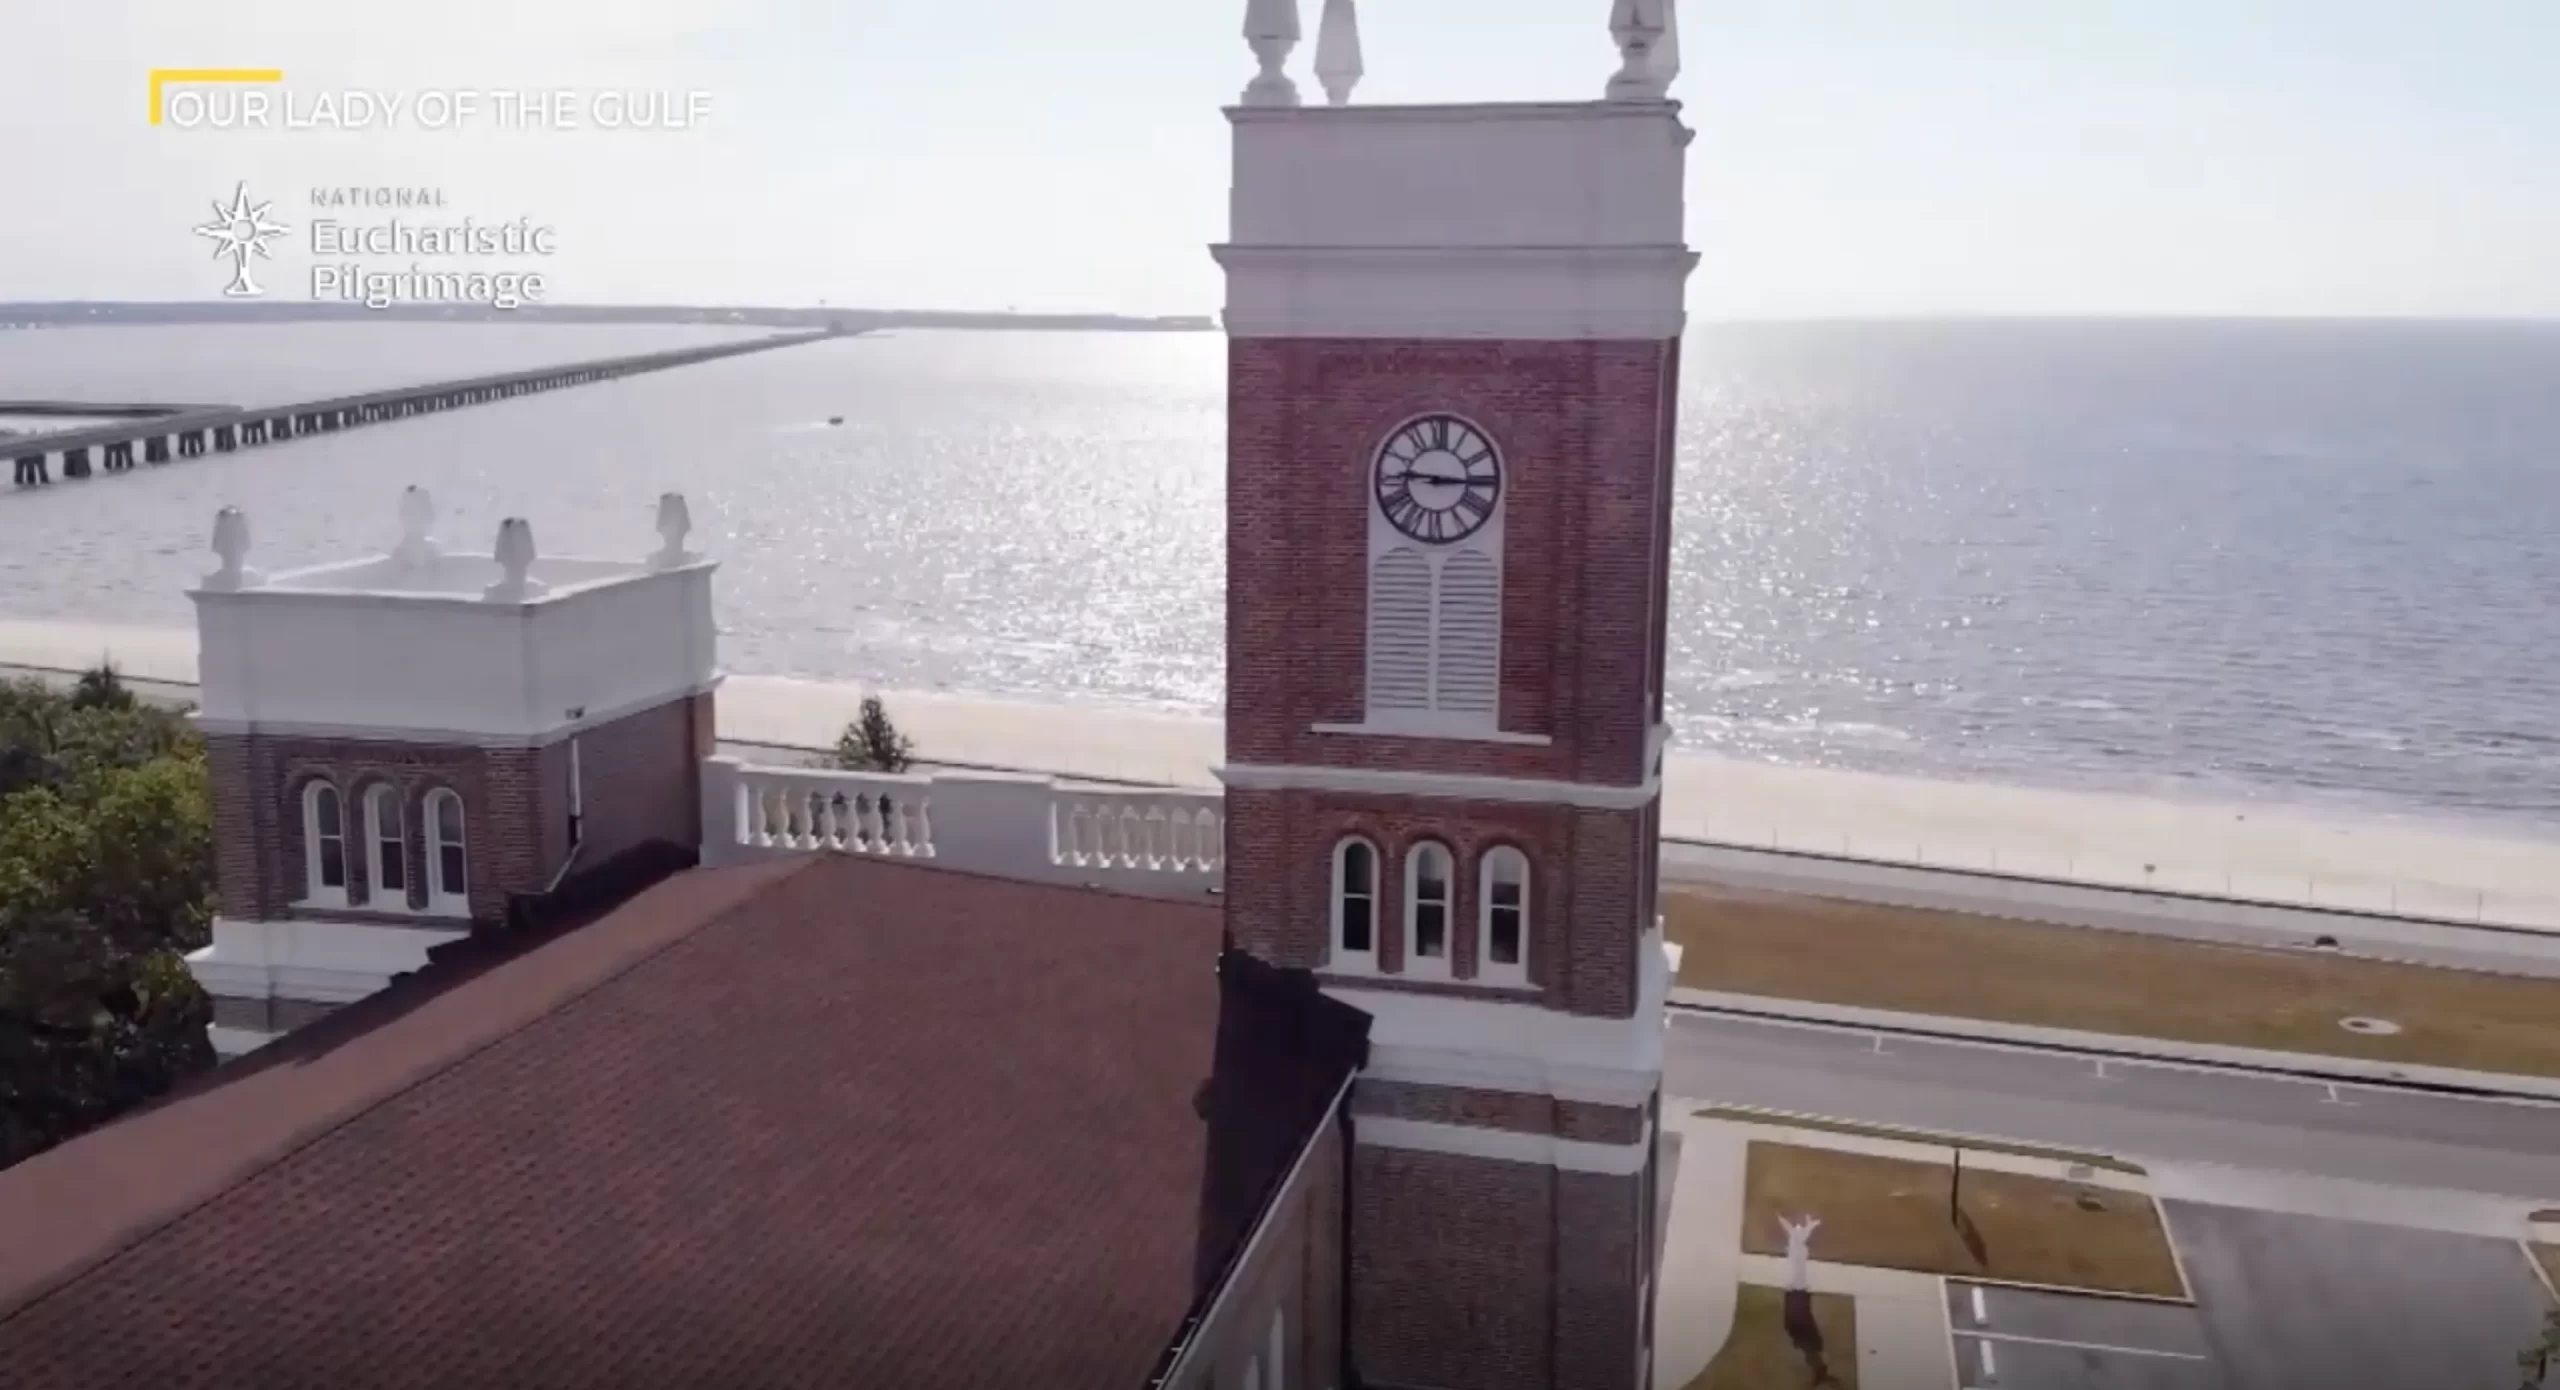 Our Lady of the Gulf on the shores of the Gulf of Mexico in St. Louis, Mississippi. Credit: Screenshot from EWTN News In Depth